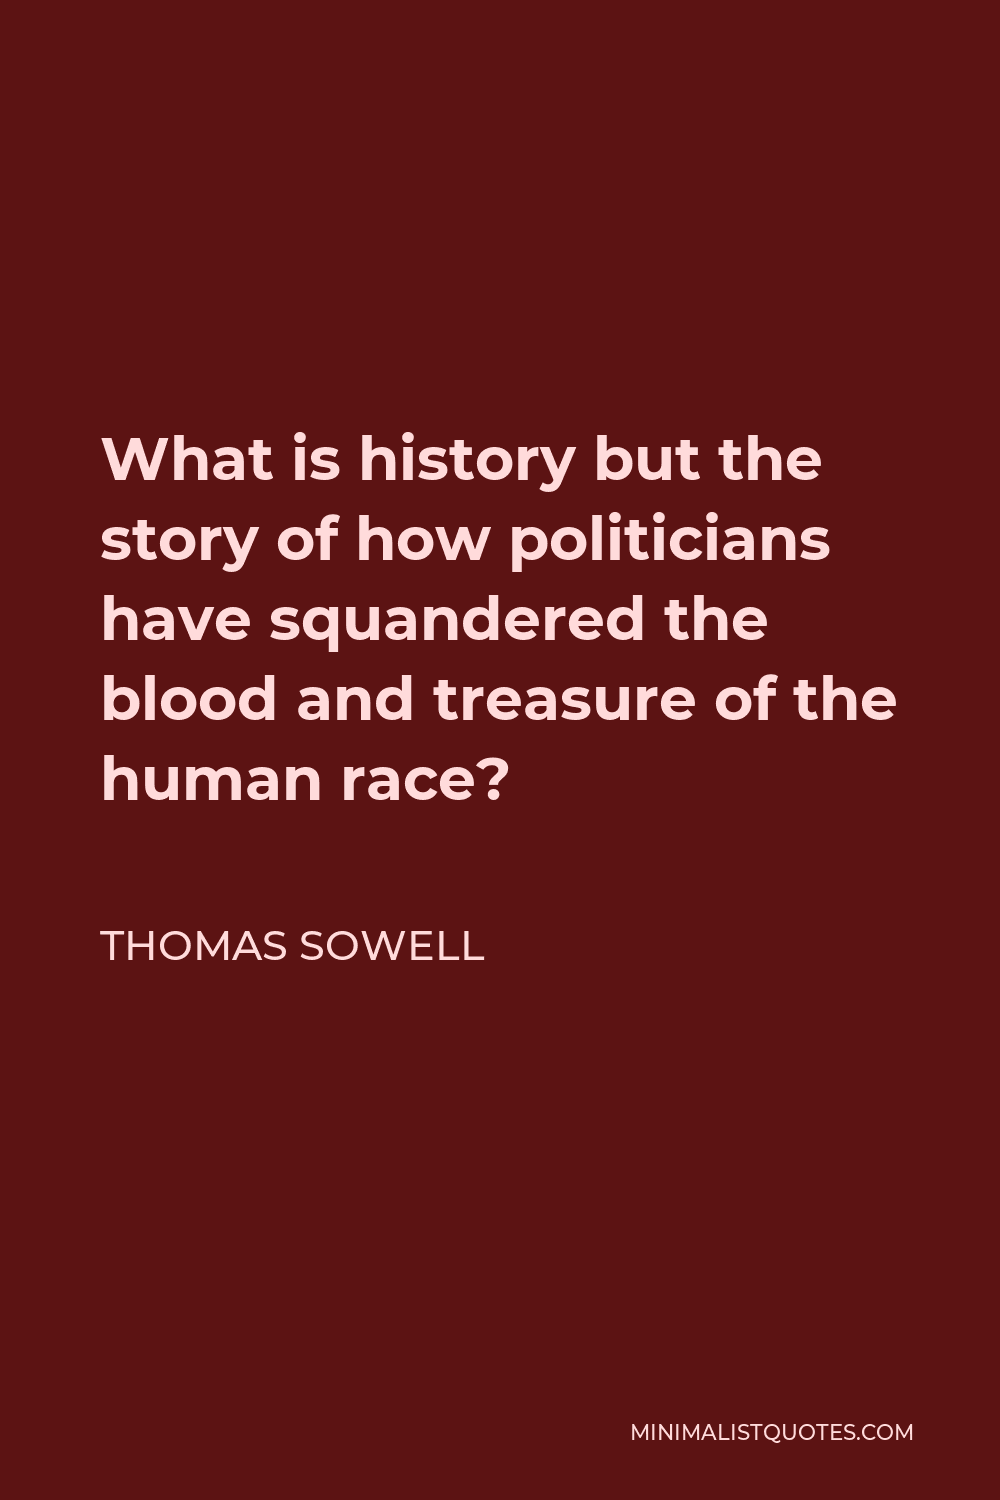 Thomas Sowell Quote - What is history but the story of how politicians have squandered the blood and treasure of the human race?